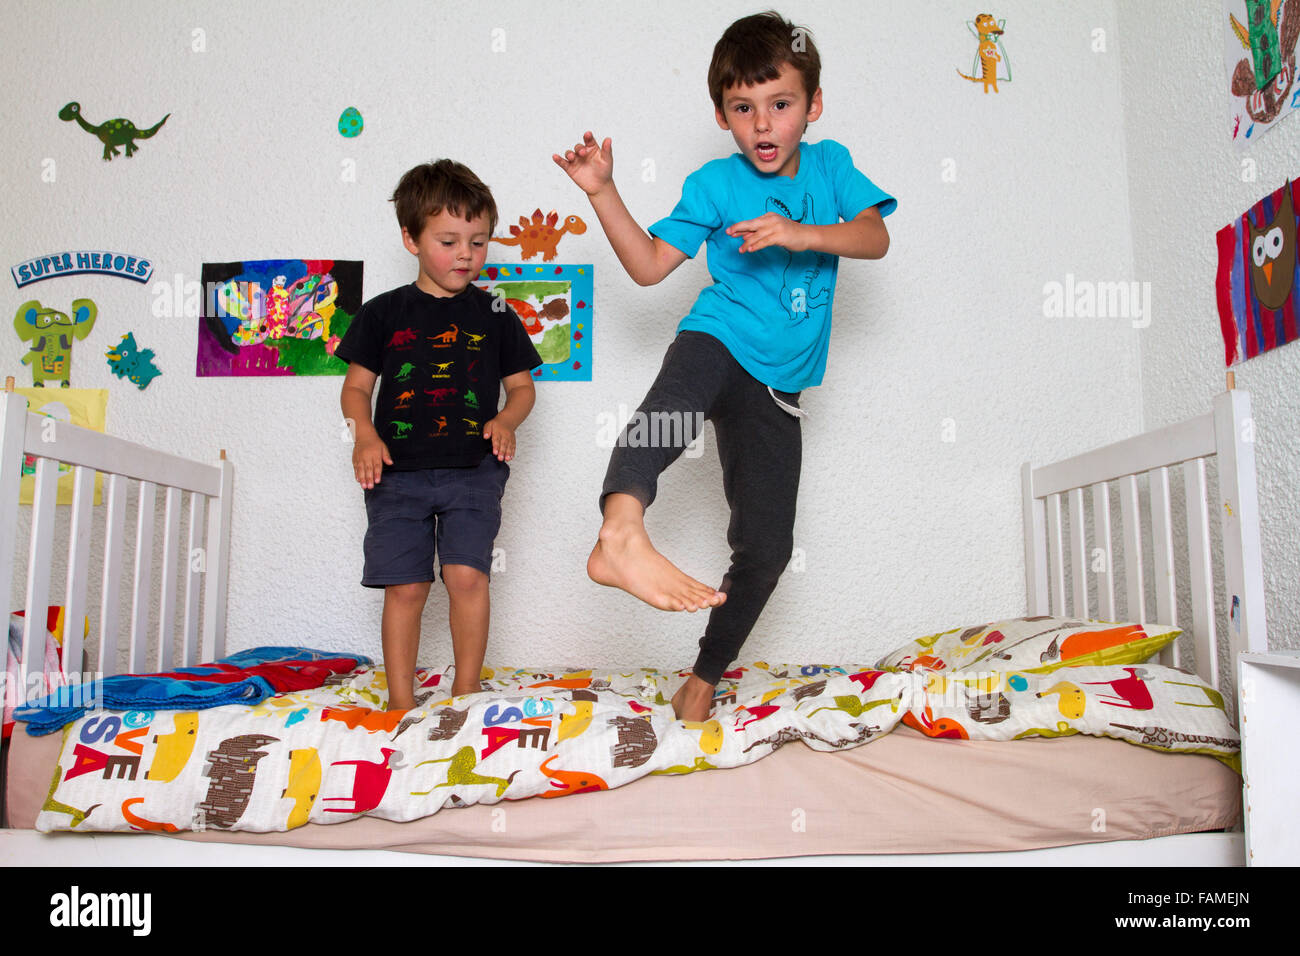 Boys jumping on bed Stock Photo